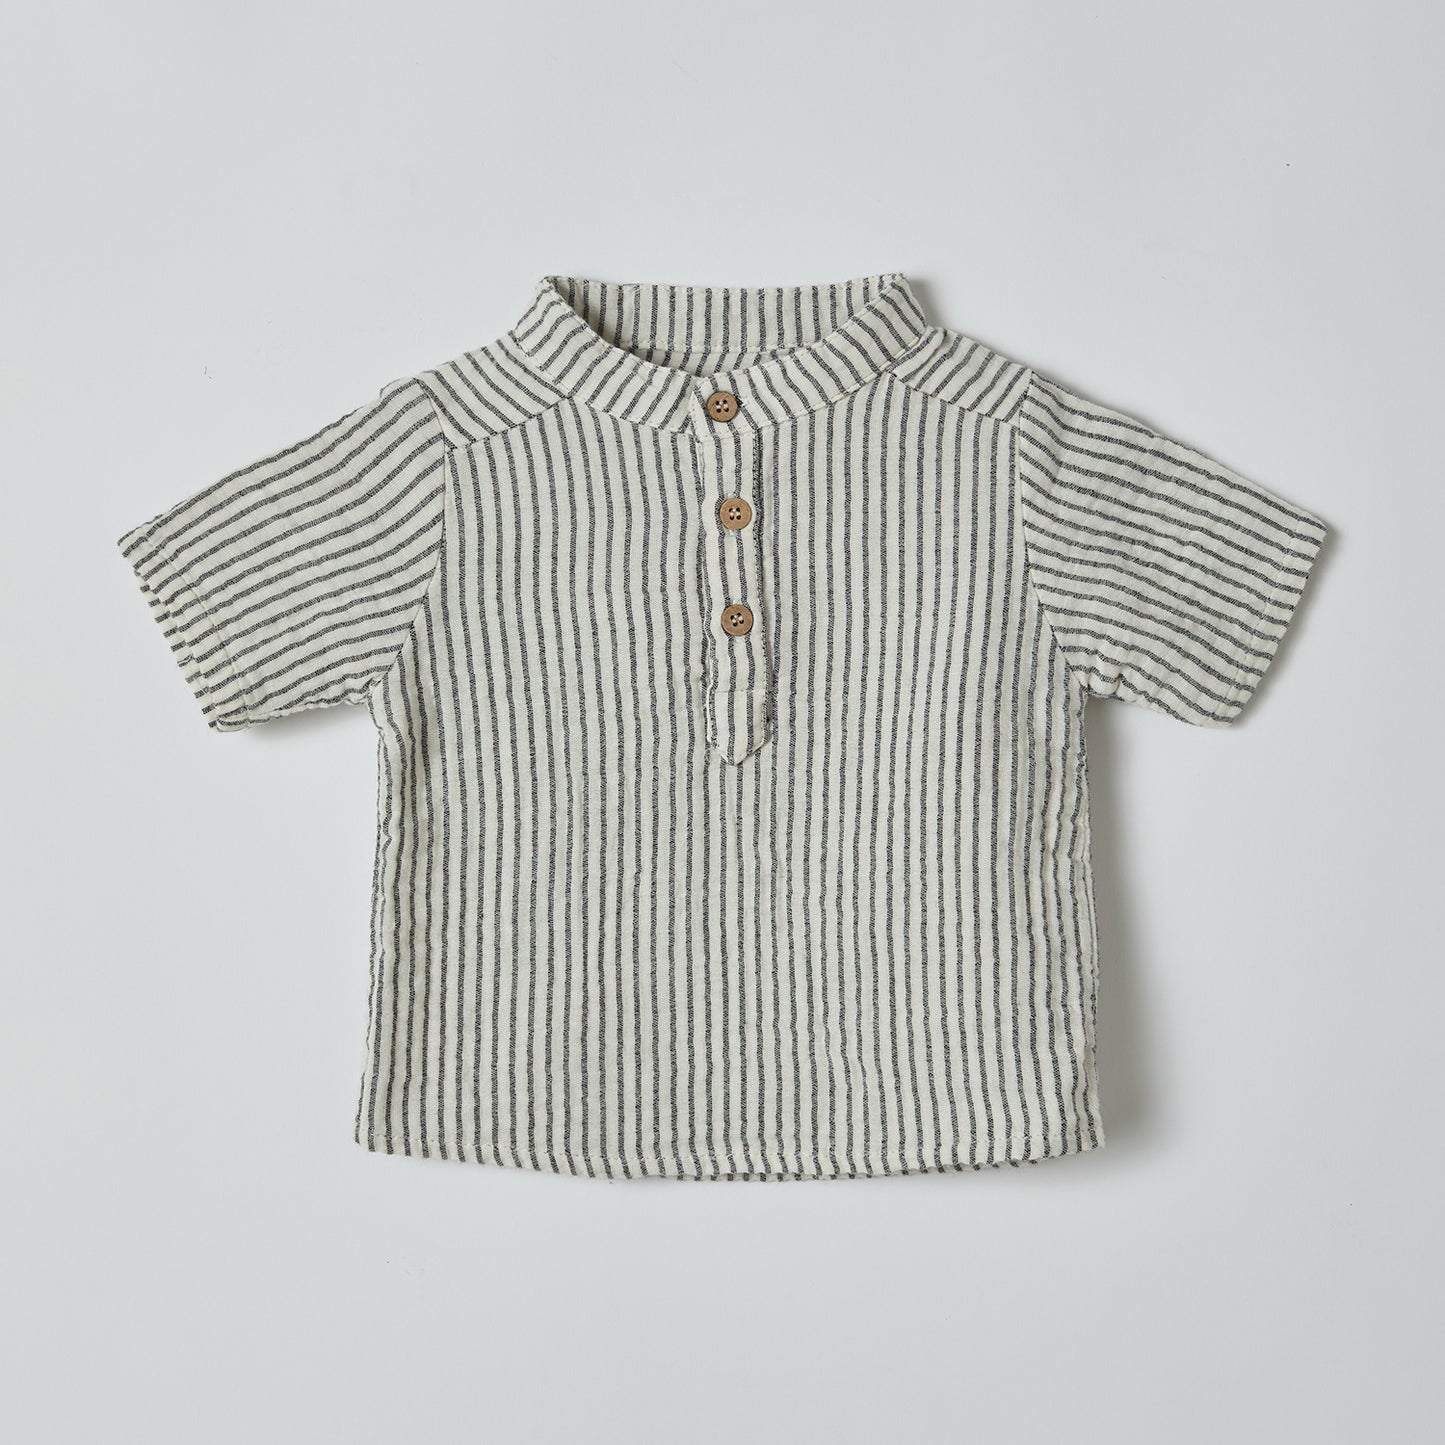 Organic Muslin Shirt for boys with bottoms Aged 6m -6 Years colored Anthracite Striped